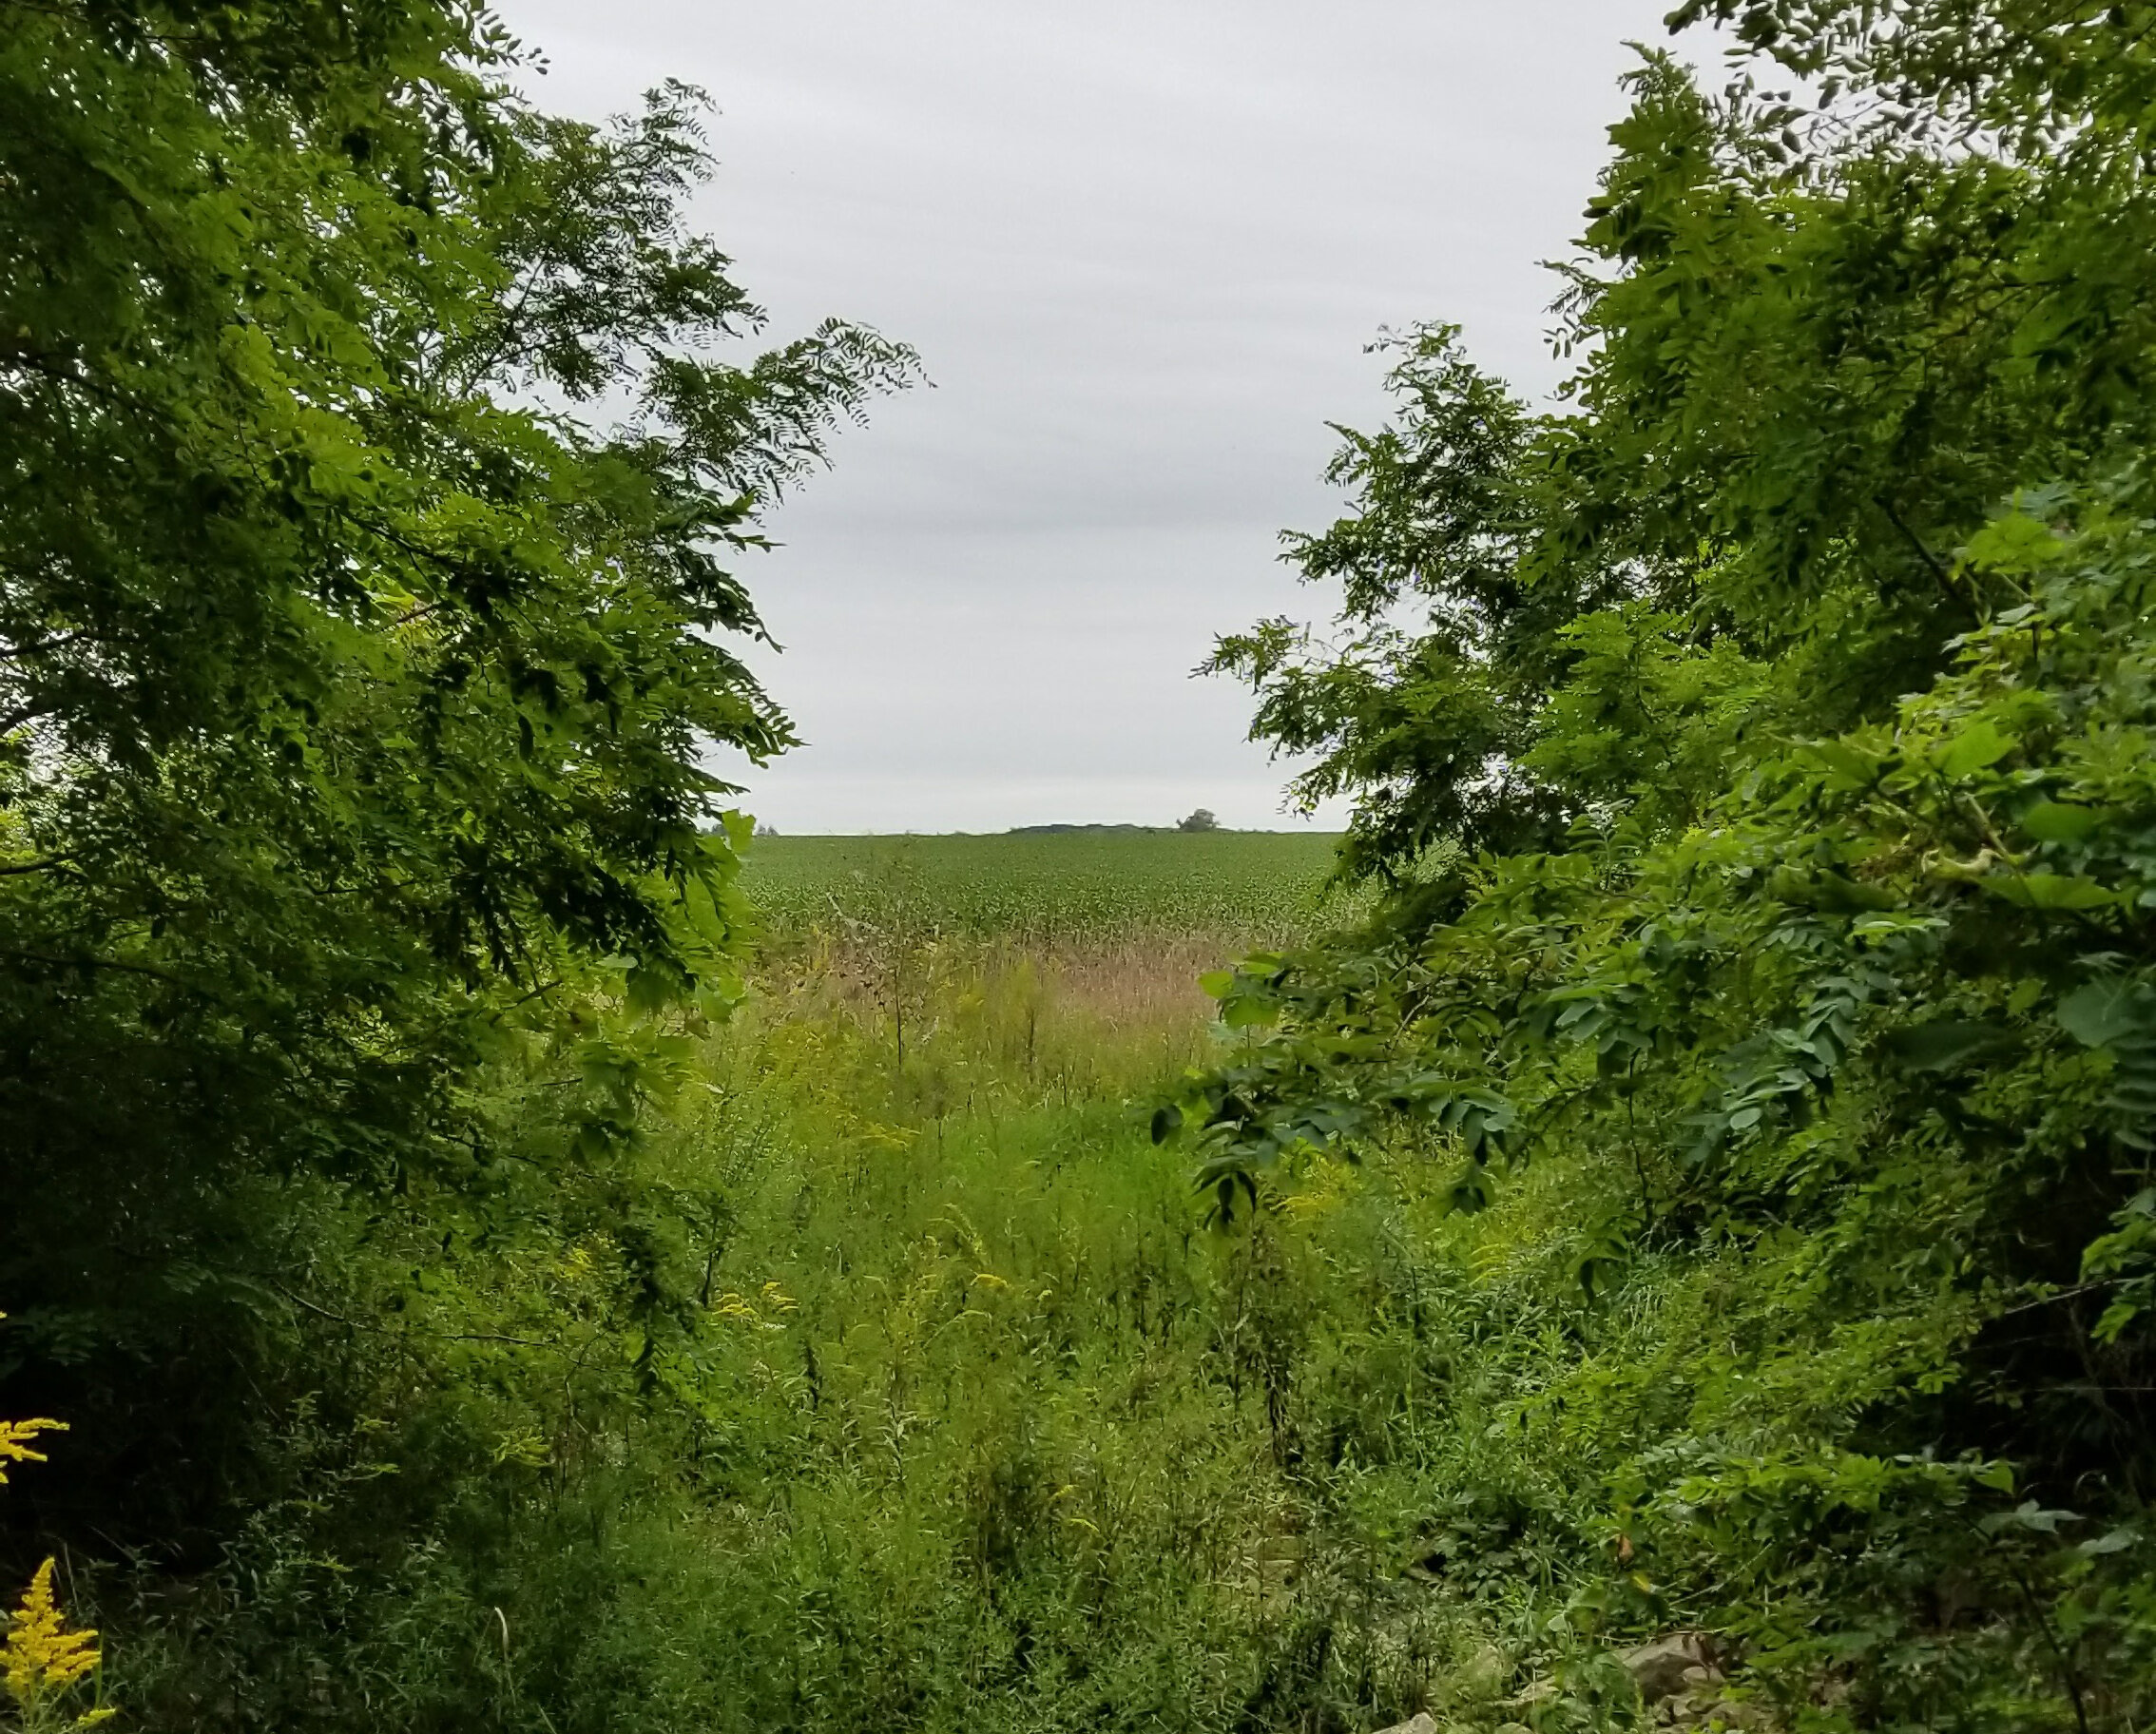 Clearing through trees along the trail at Kipton Reservation